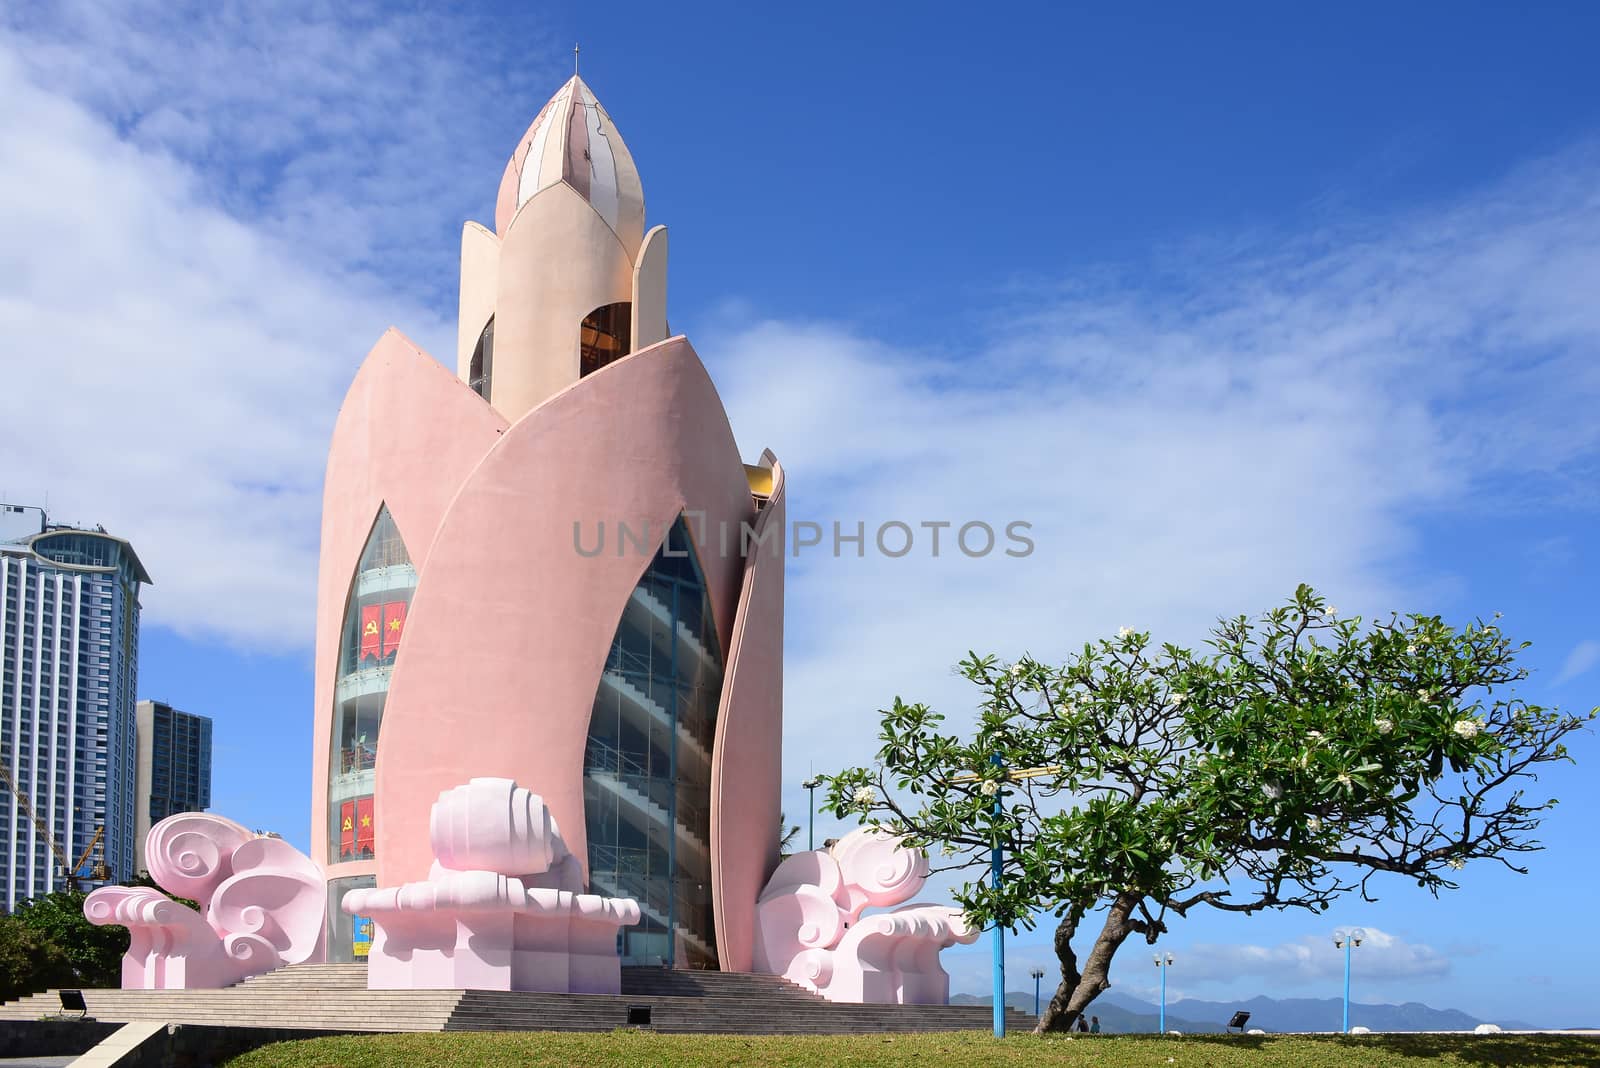 NHA TRANG, VIETNAM – 29 FEBRUARY 2020 : Tram Huong Tower, which is located in the center of the city,is considered as the symbol of Nha Trang city